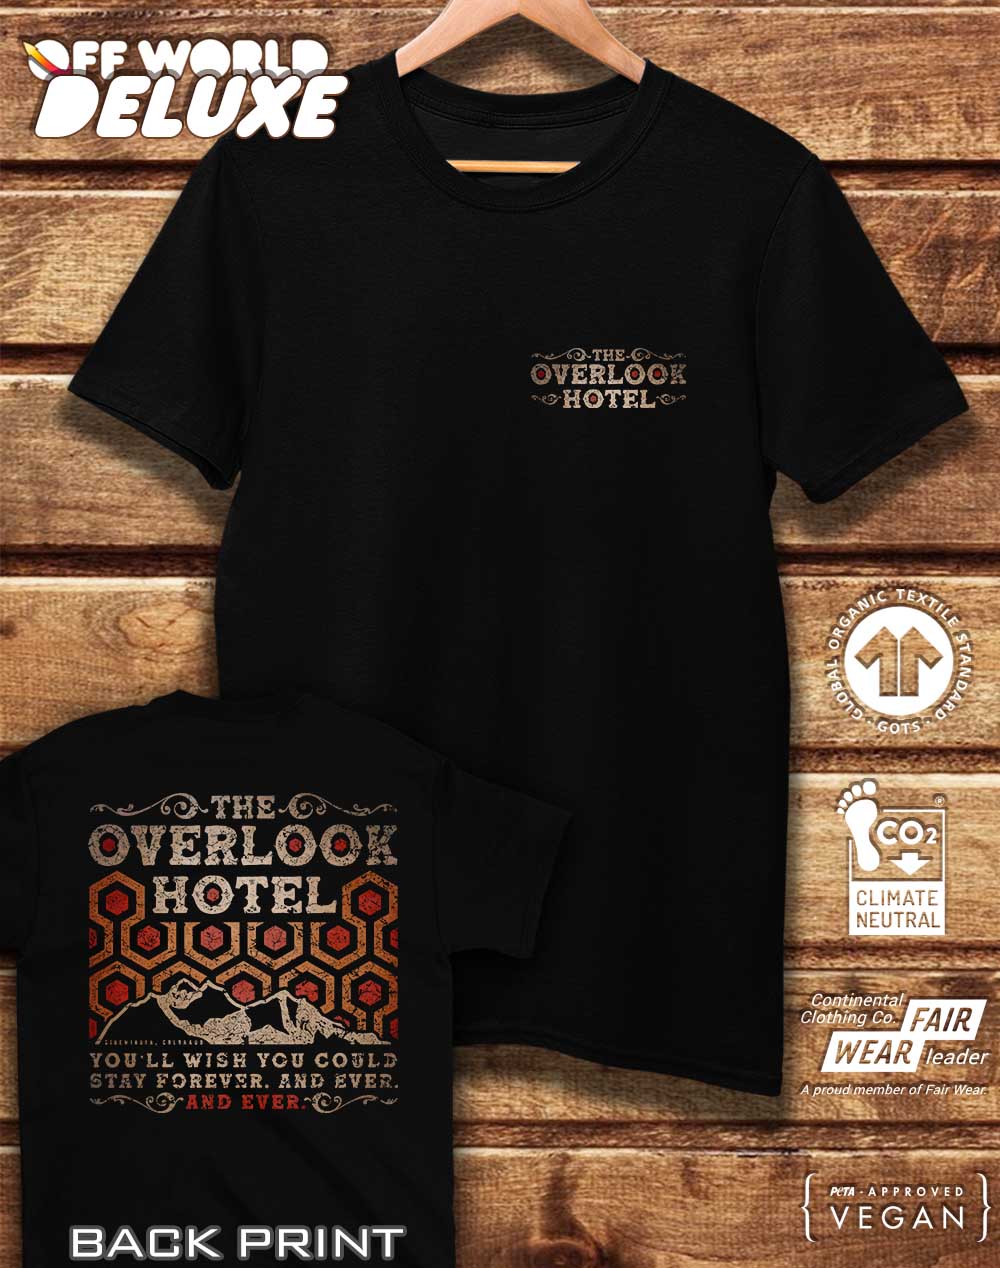 DELUXE The Overlook Hotel with Back Print Organic Cotton T-Shirt